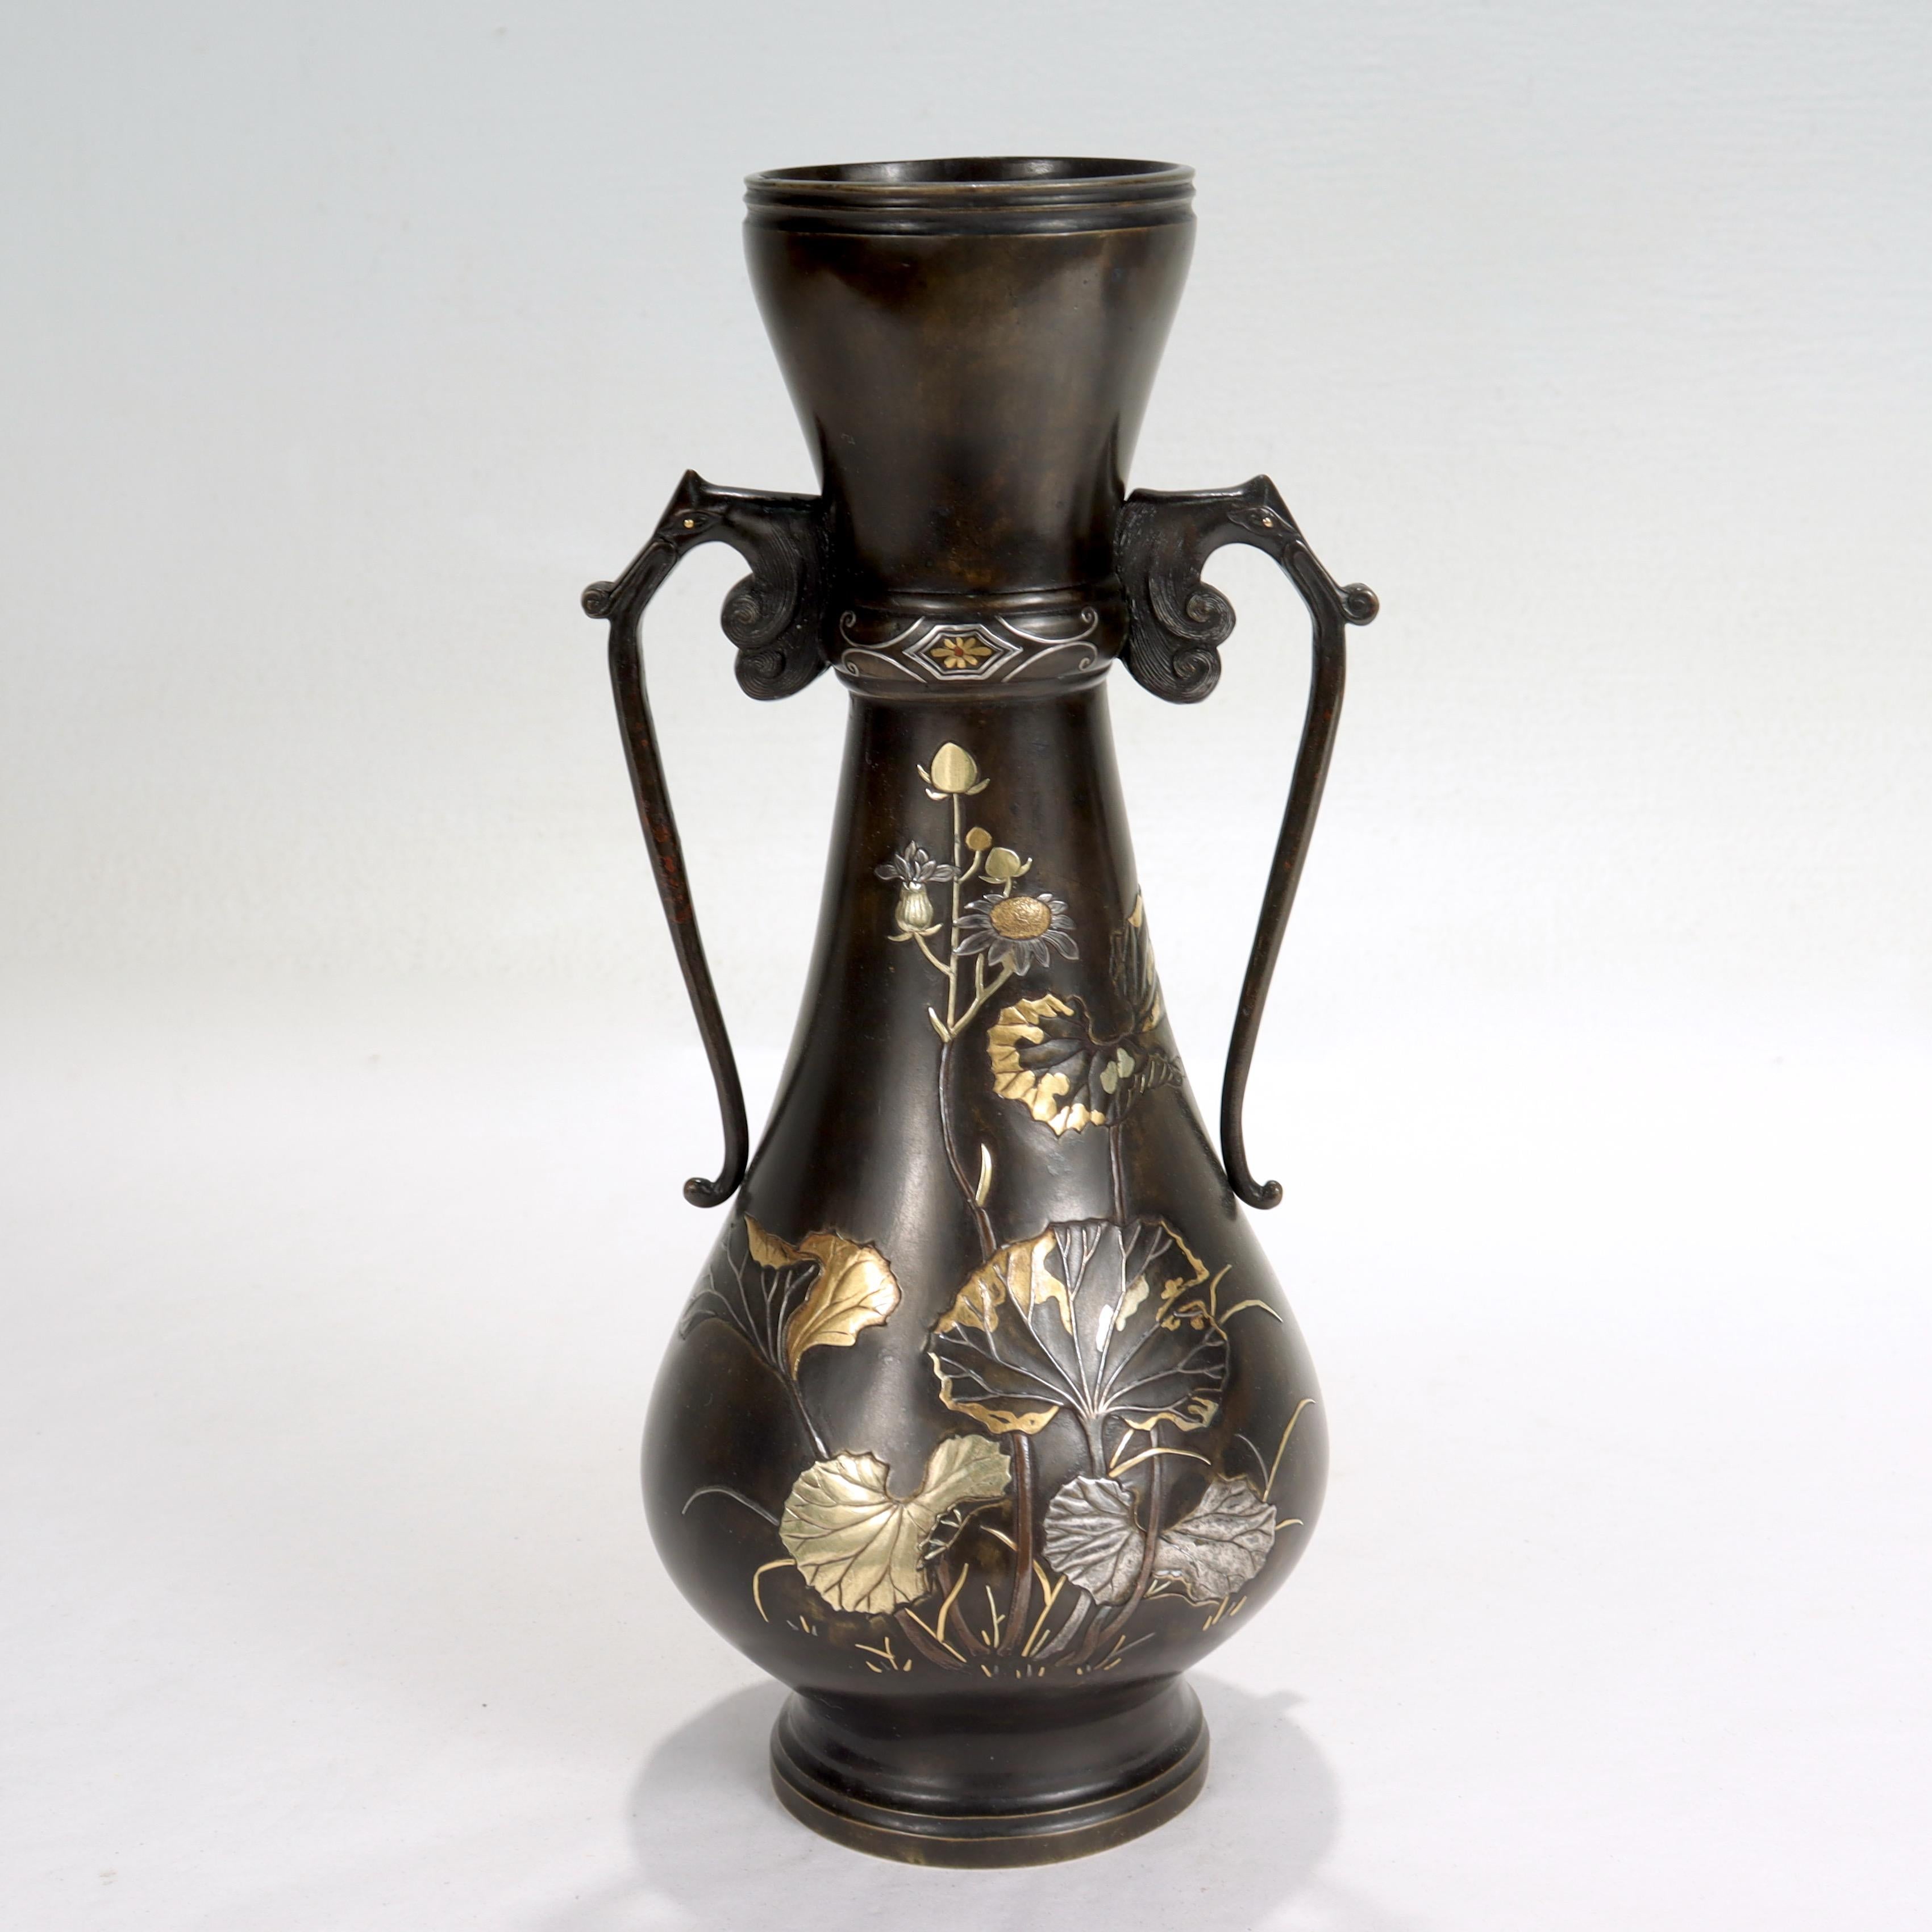 A fine antique Japanese double-handled bronze vase.

With mixed metals (gold, silver, and copper) inlay to the neck, neck handles and raised decoration. (Likely Meiji period), raised depictions of giant butterbur (fuki) to the body and figural